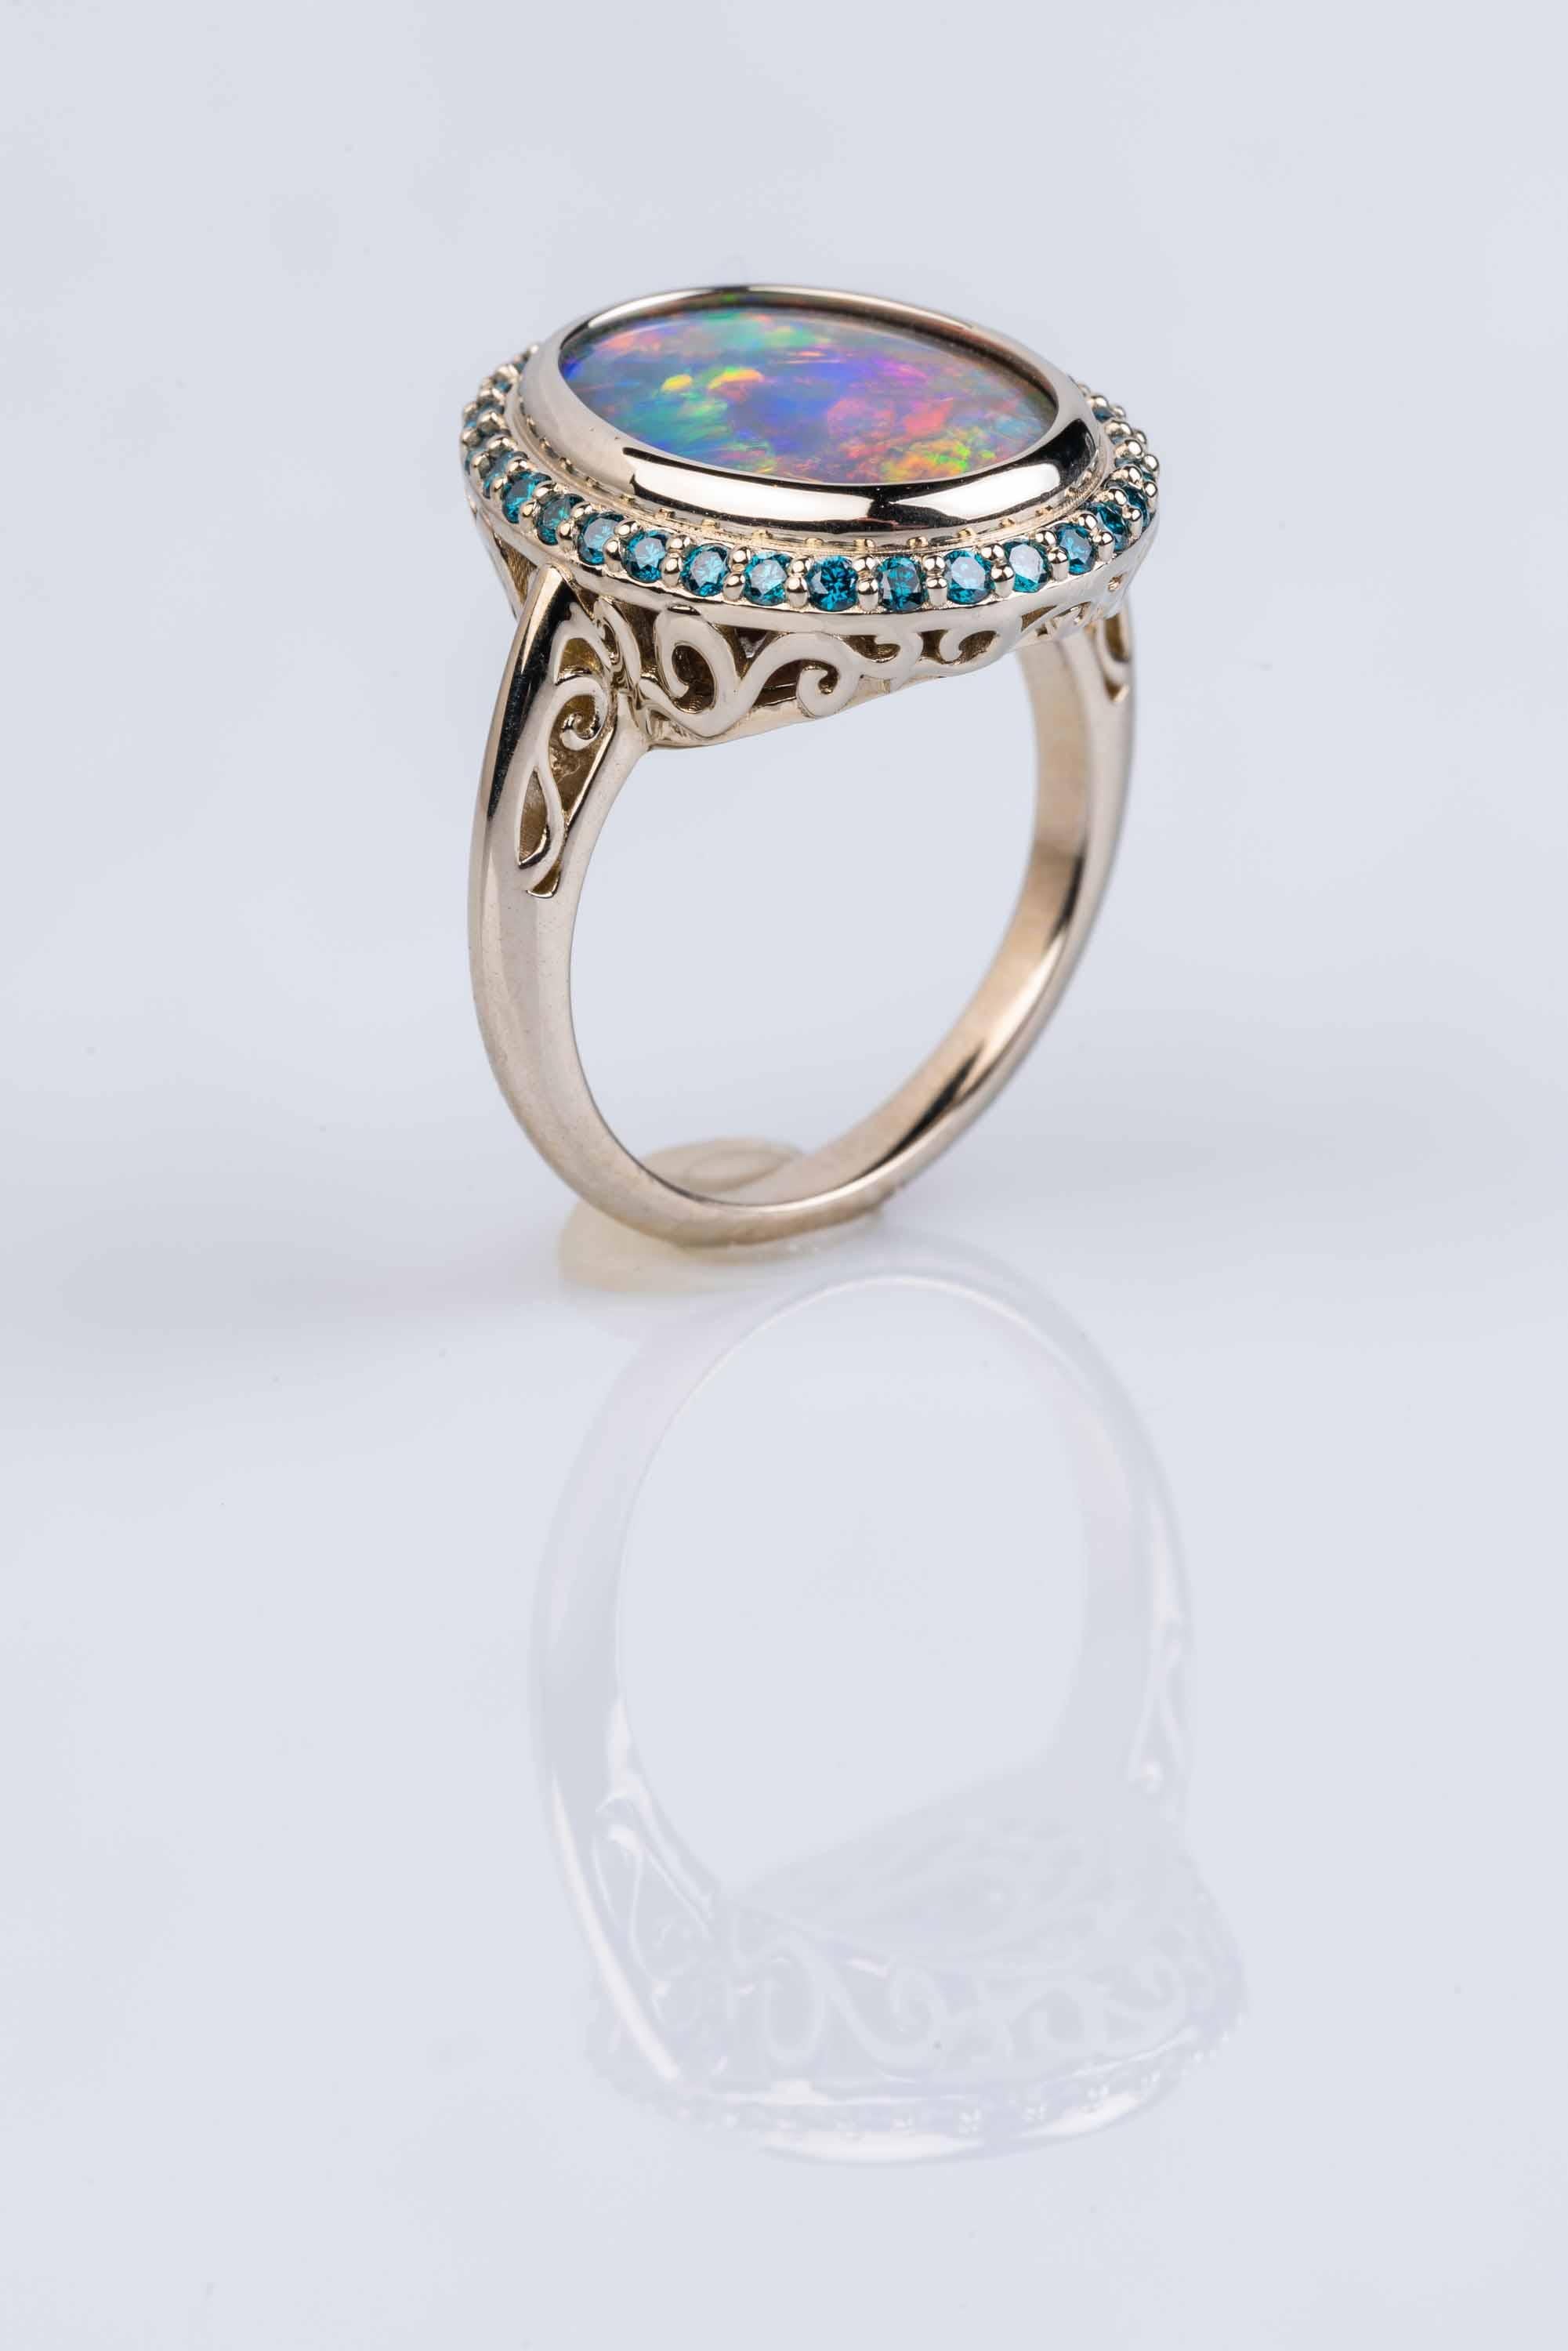 An 18k white gold ring, back-set with a 12.3x15.1mm free form Lightening Ridge Australian black opal, 5.27ct, surrounded by a halo of 32 bead-set 1.5mm teal blue diamonds, 0.40 total carat weight. This ring is a size 7. This ring was made and